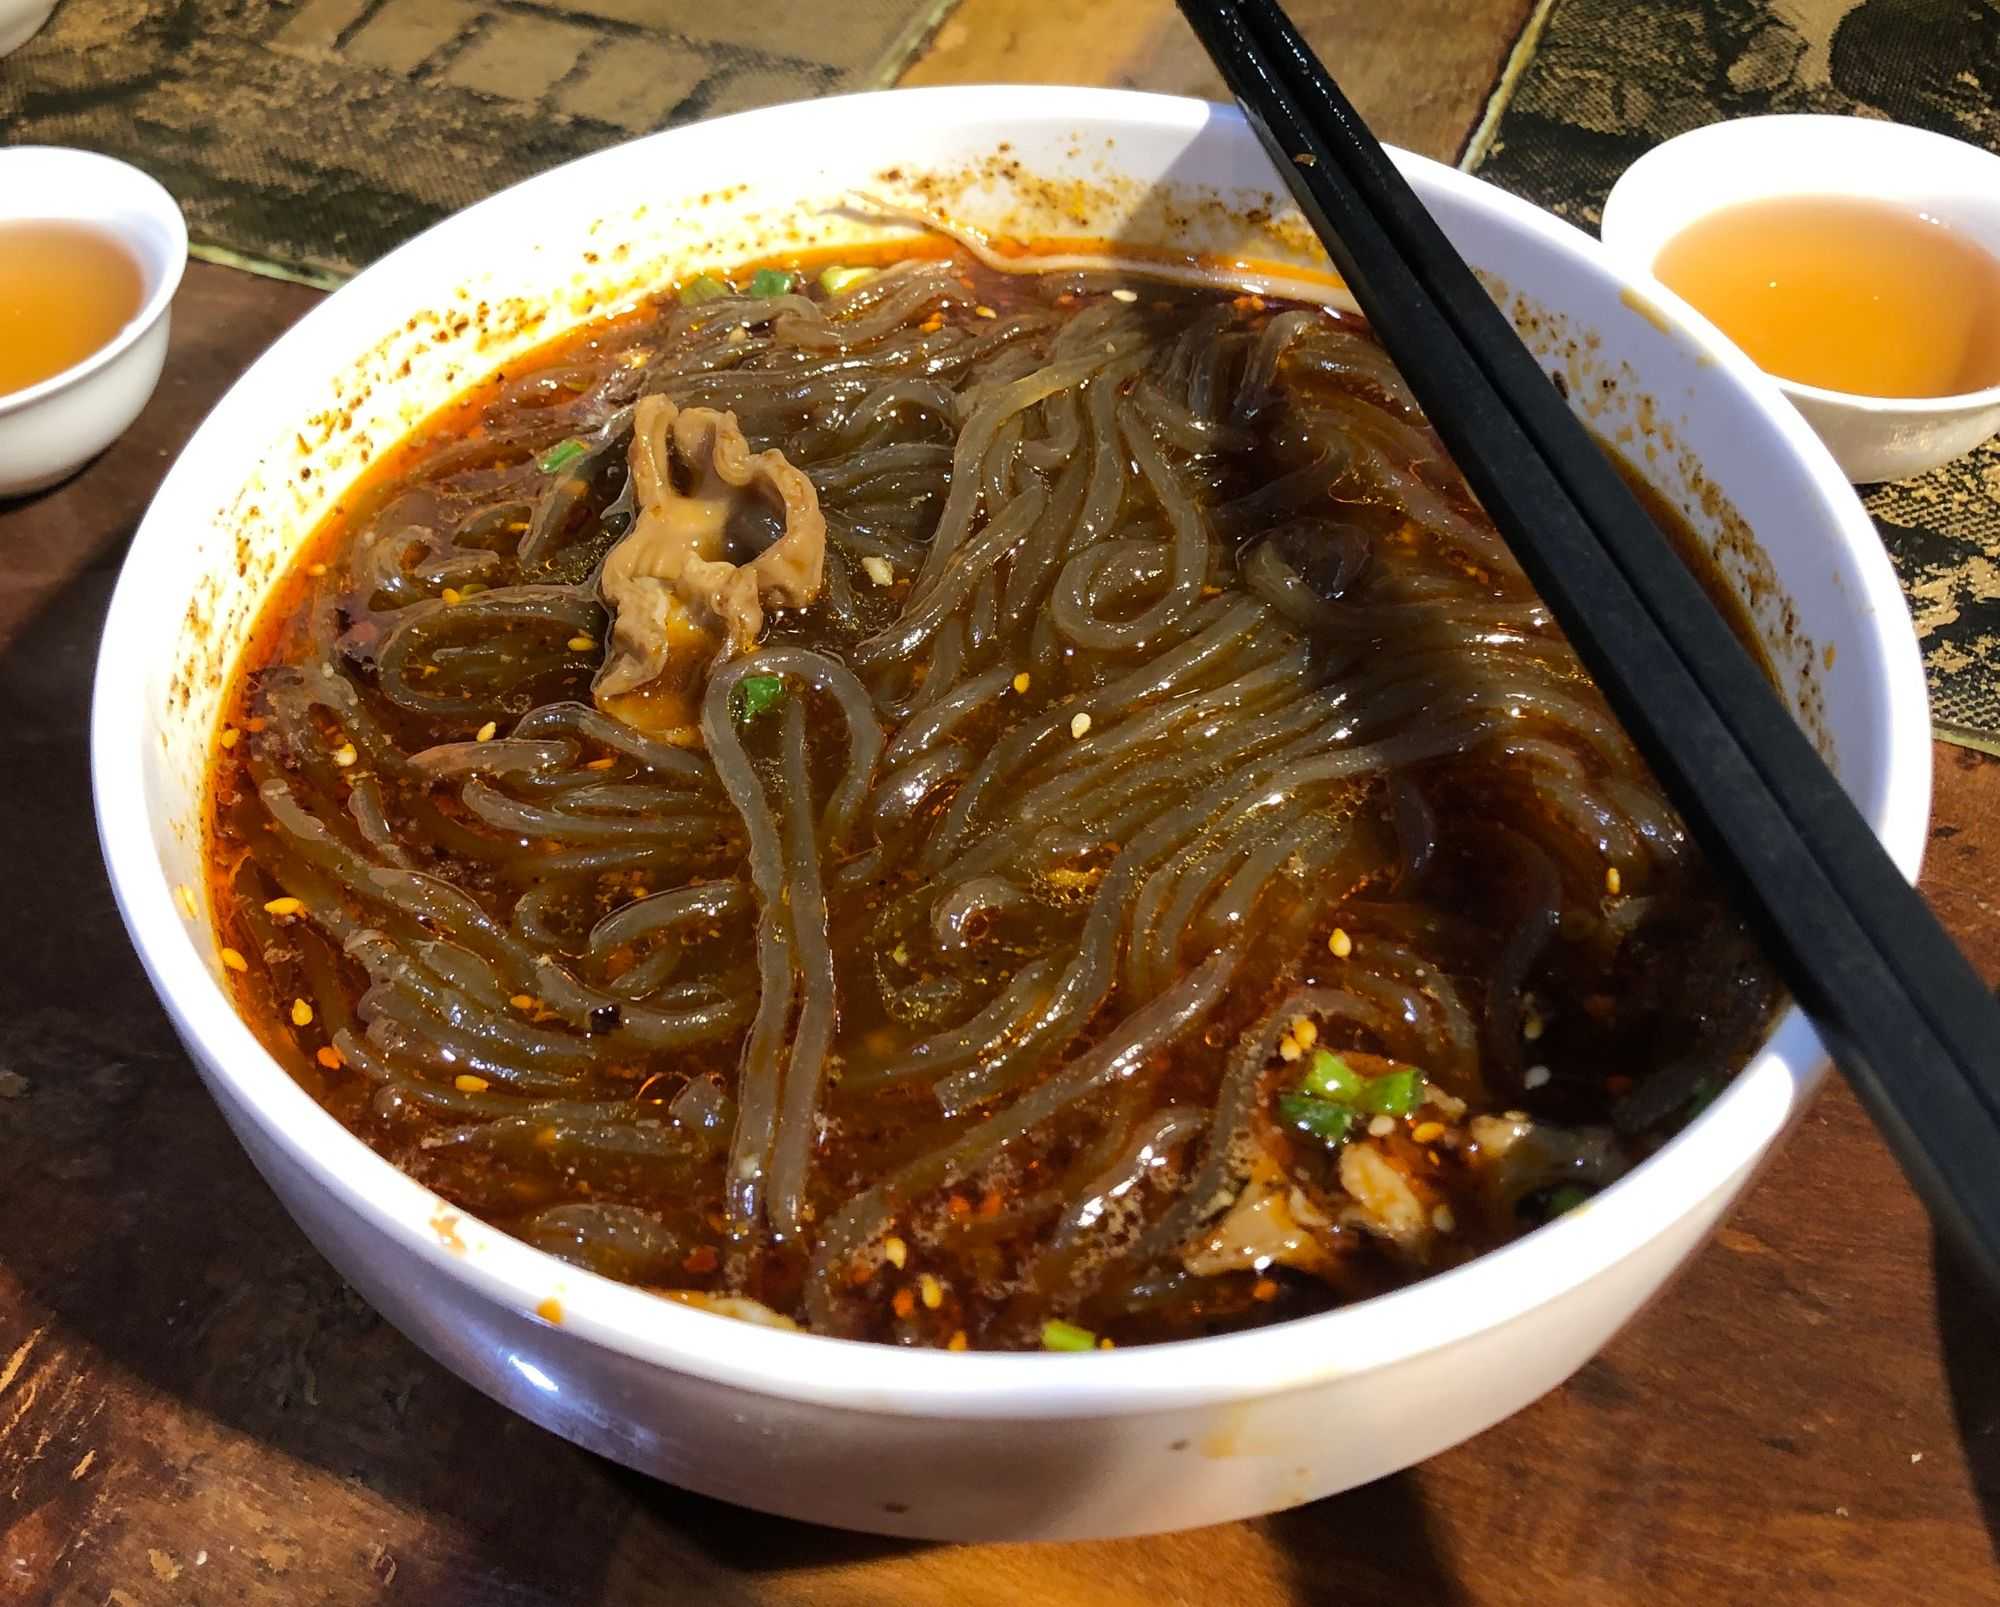 Pig intestines noodles (肥腸粉) (Image by author)